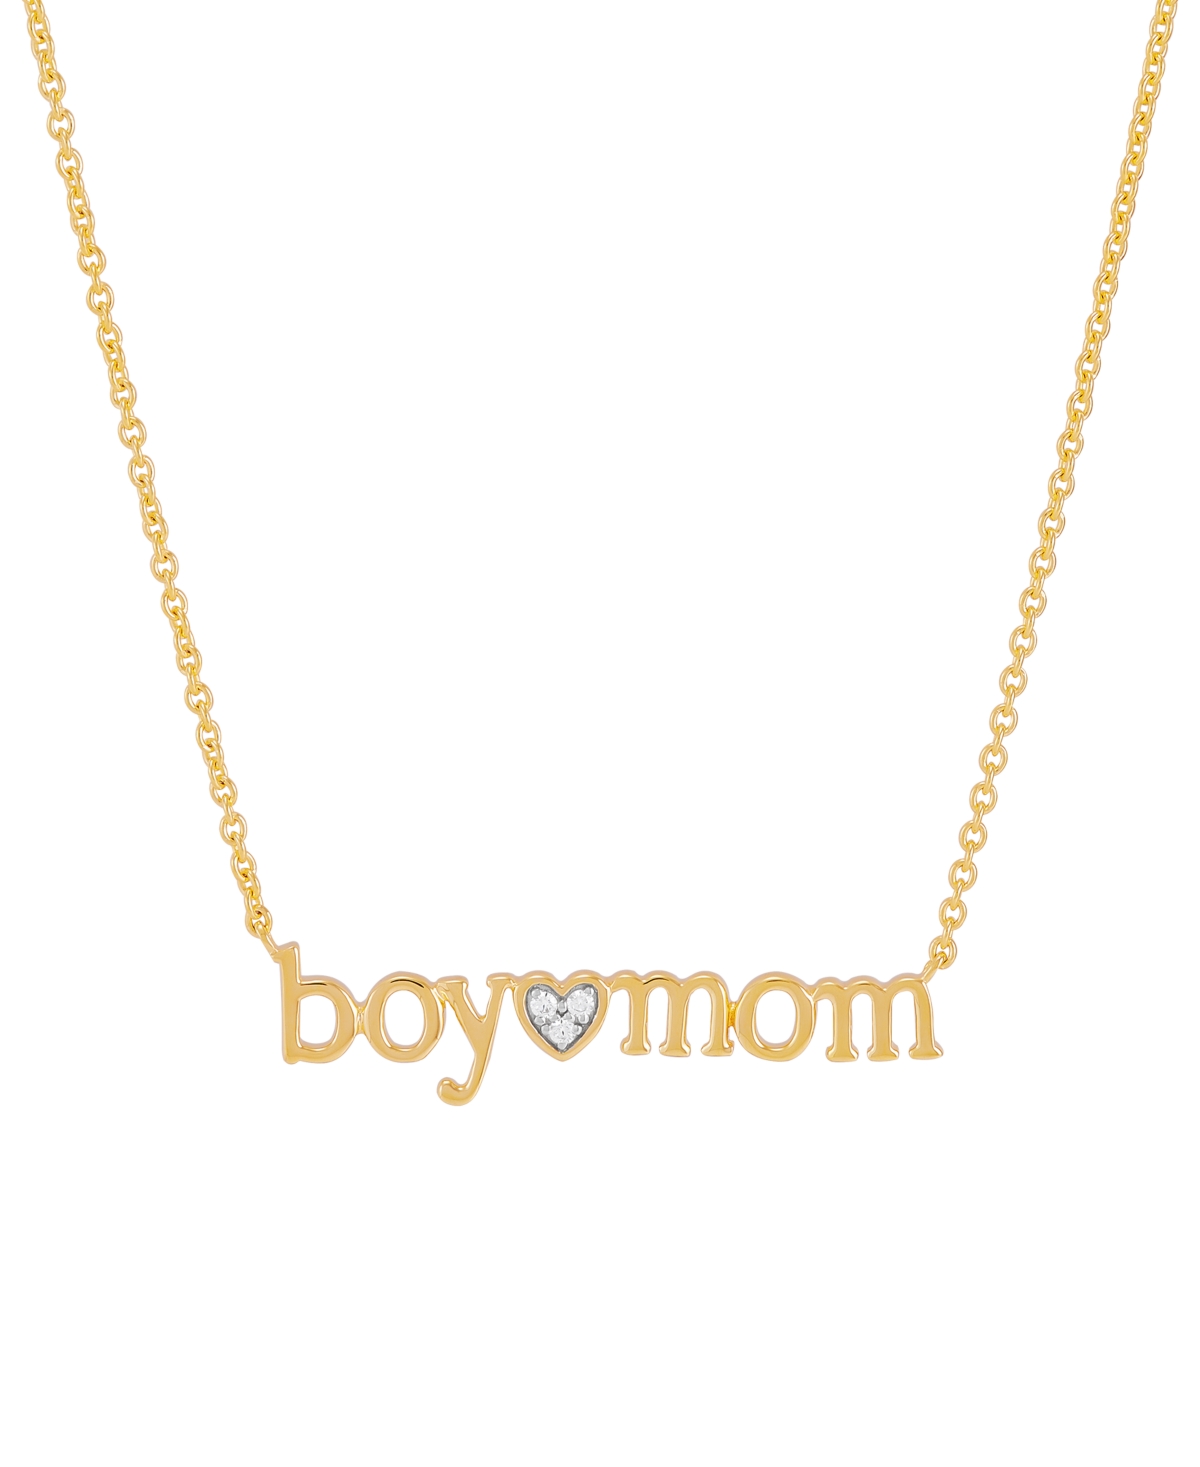 Diamond Accent Boy Mom Pendant Necklace in Sterling Silver or 14k Gold-Plated Sterling Silver, 16" + 2" extender - Gold-Plated Sterling Silver